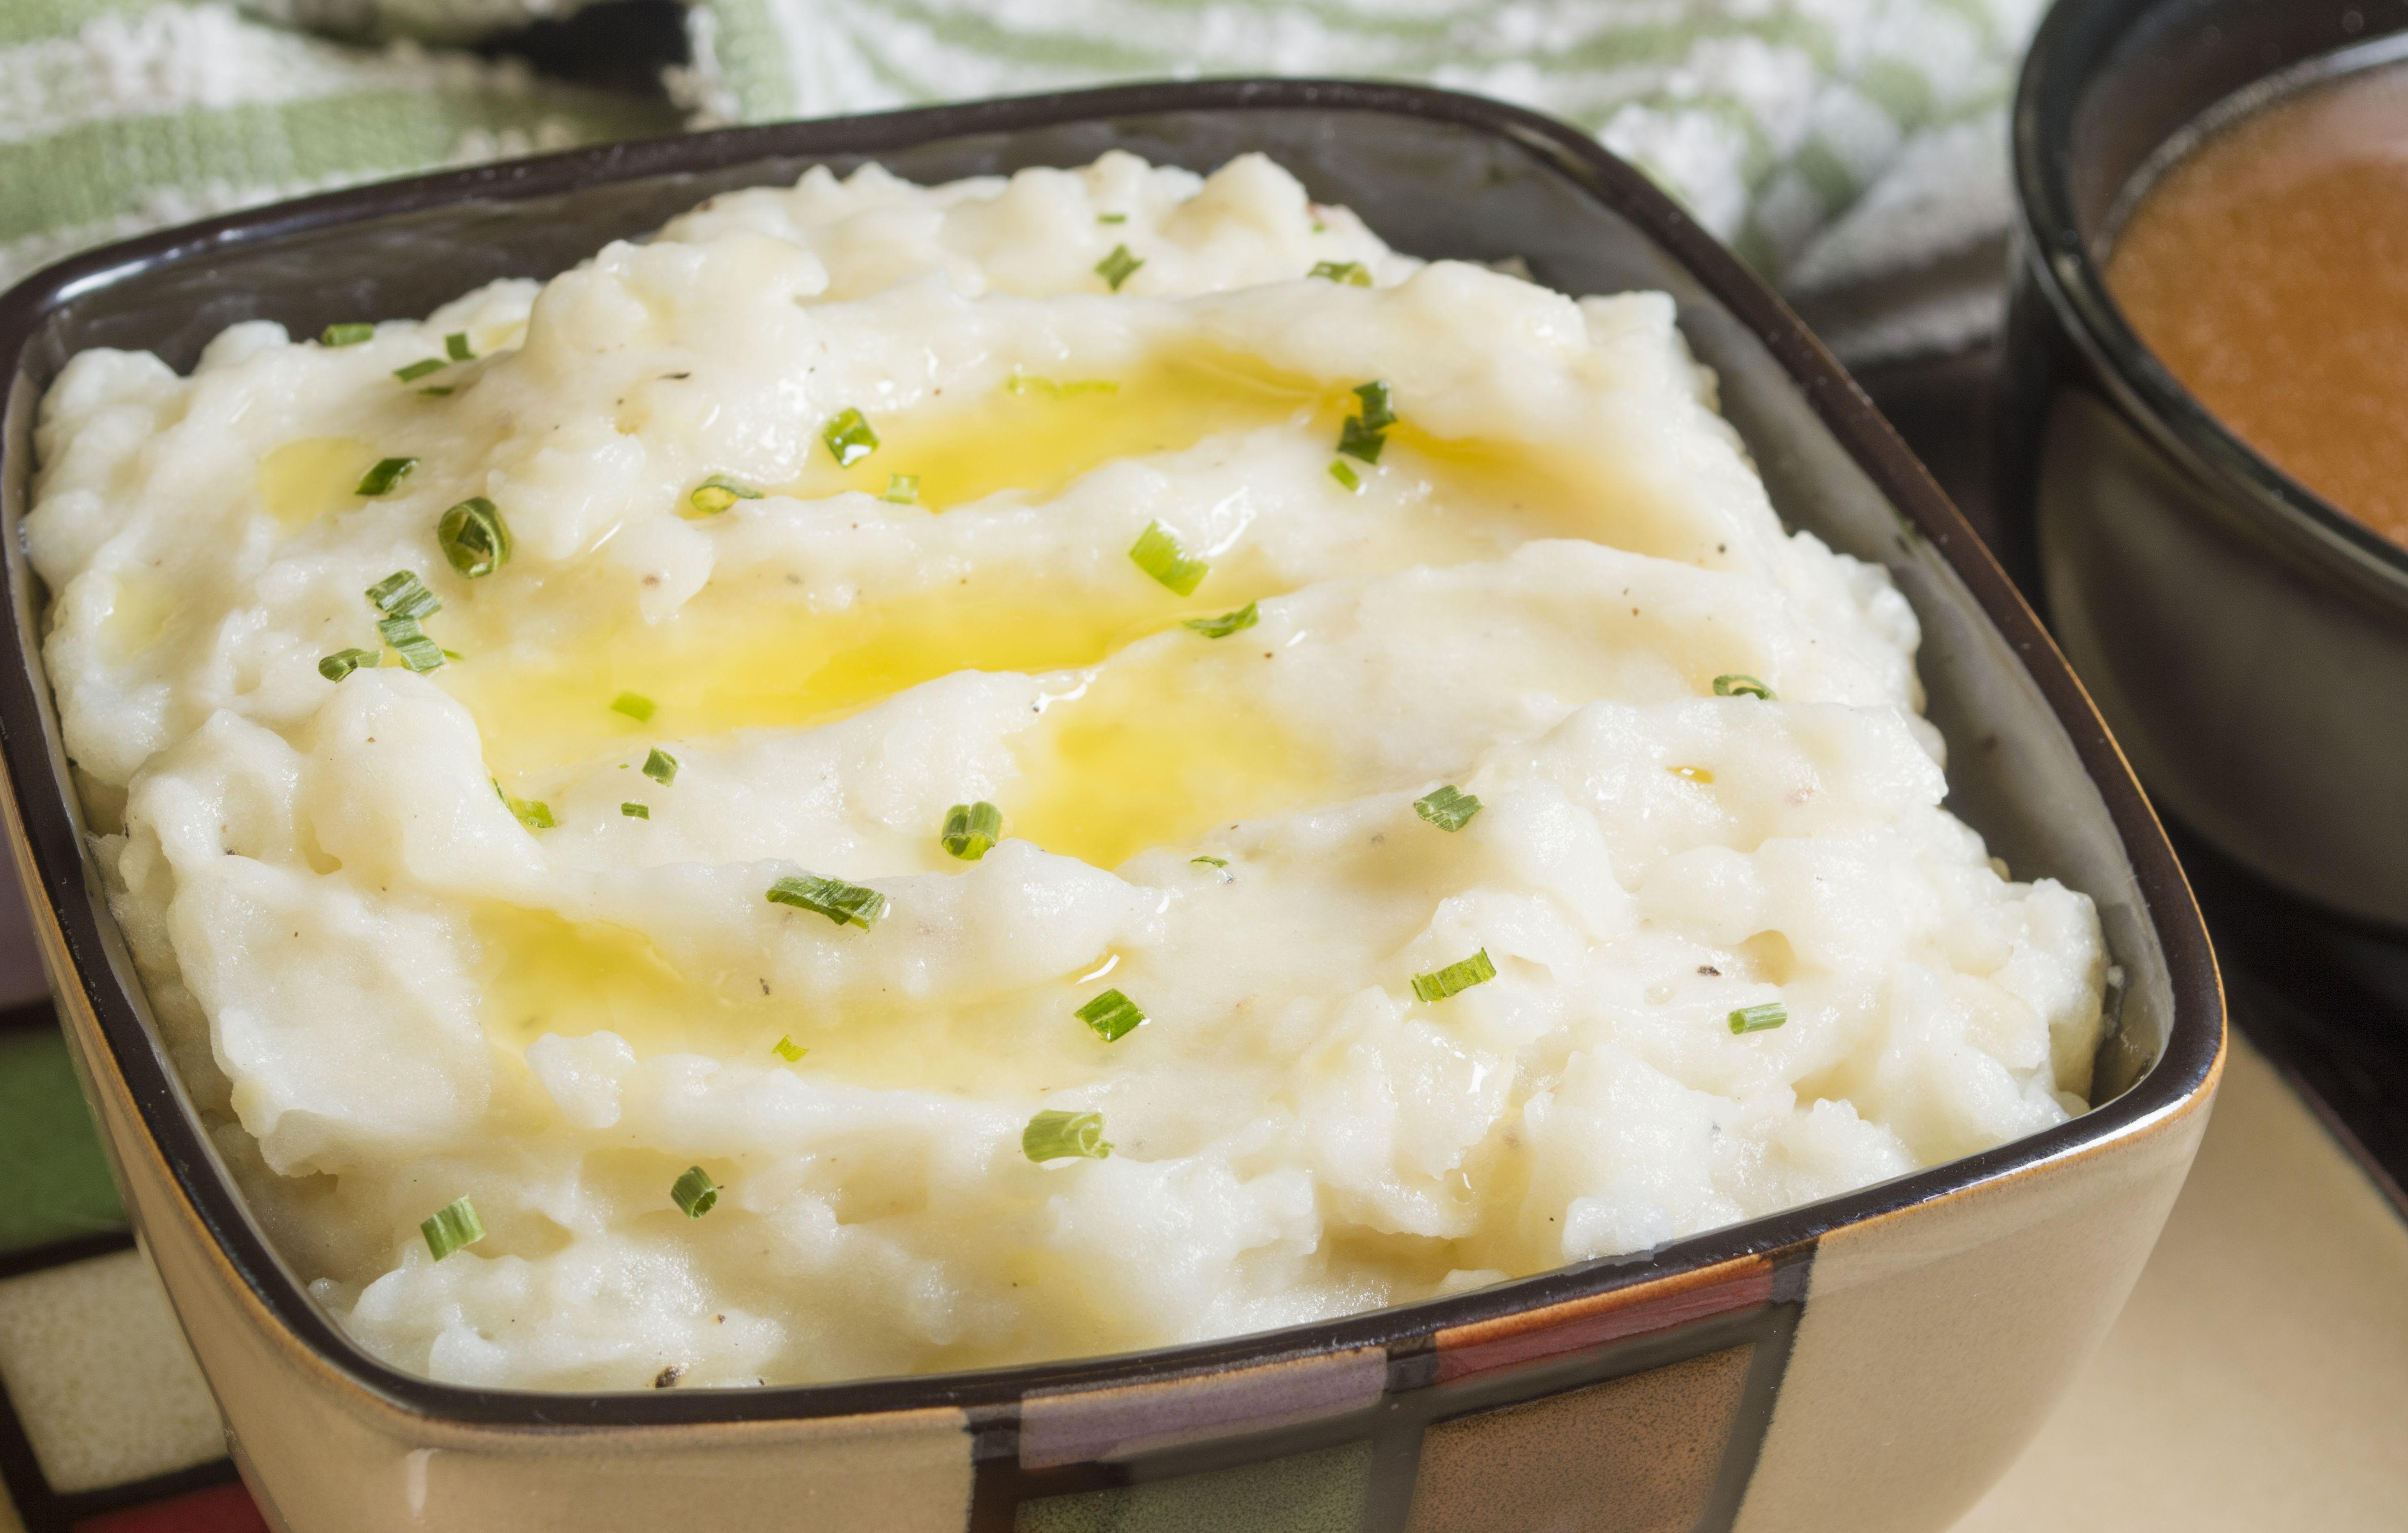  a bowl of mashed potatoes with butter